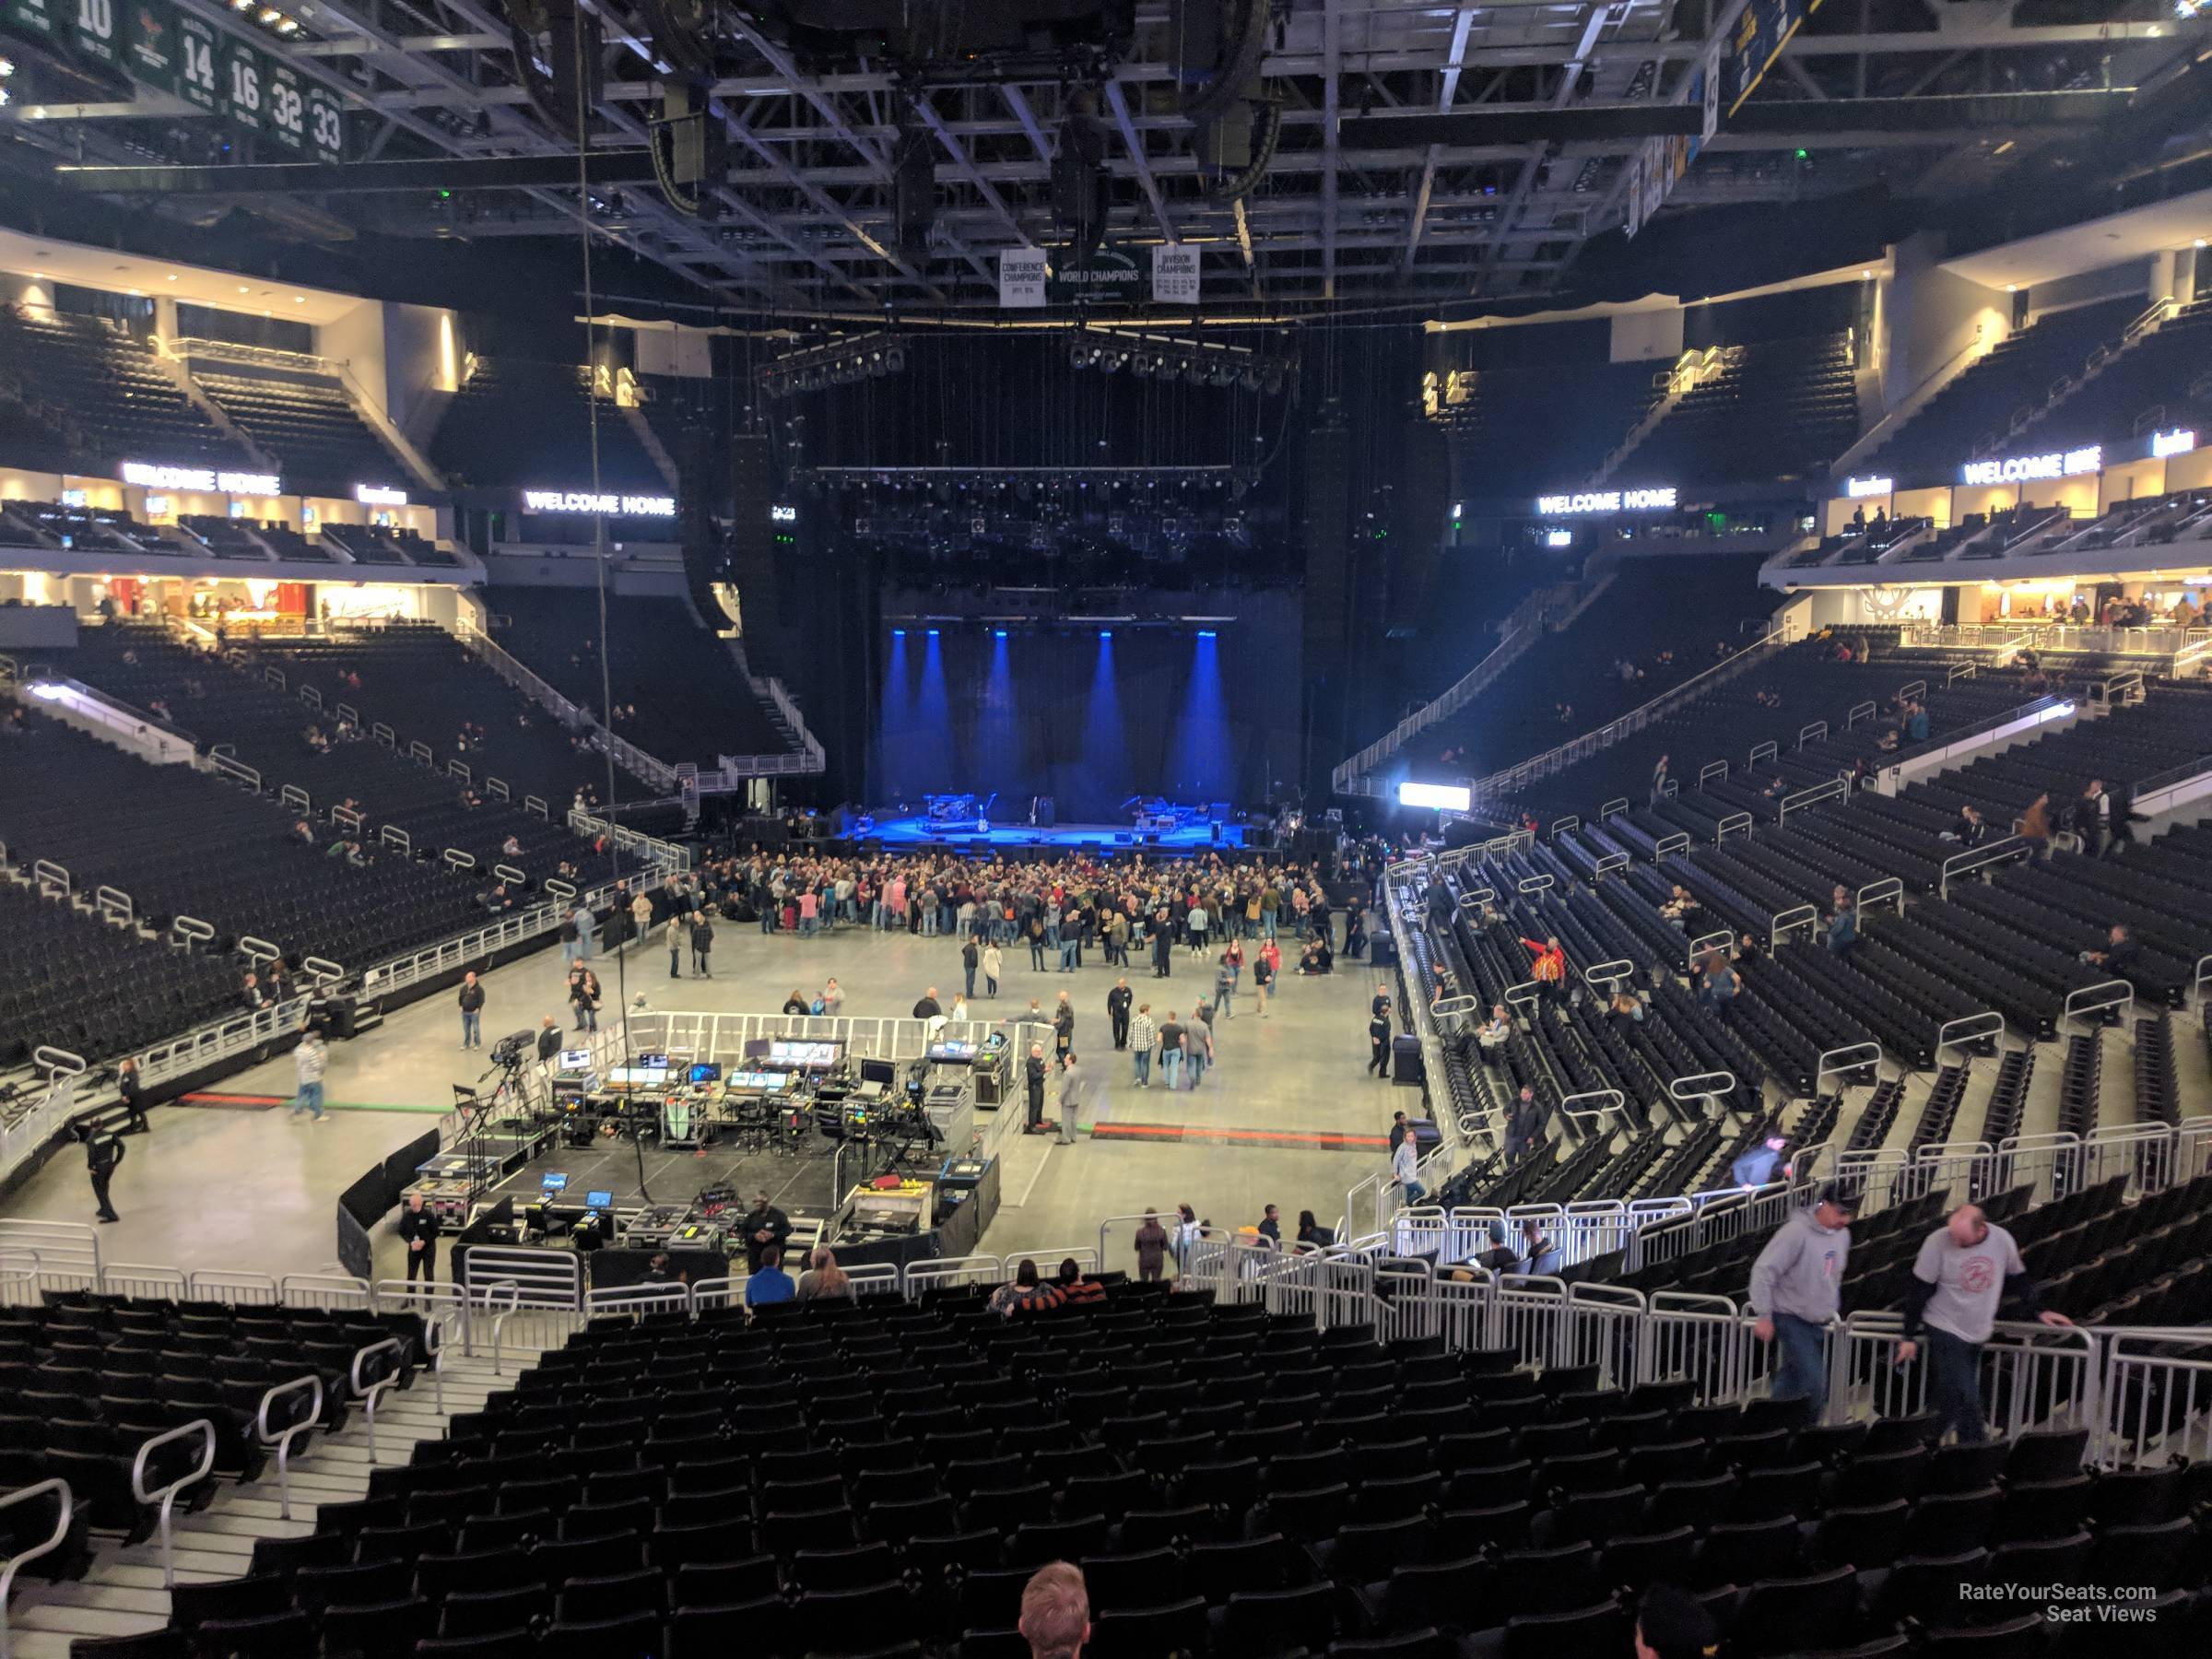 Section 121 at Fiserv Forum for Concerts